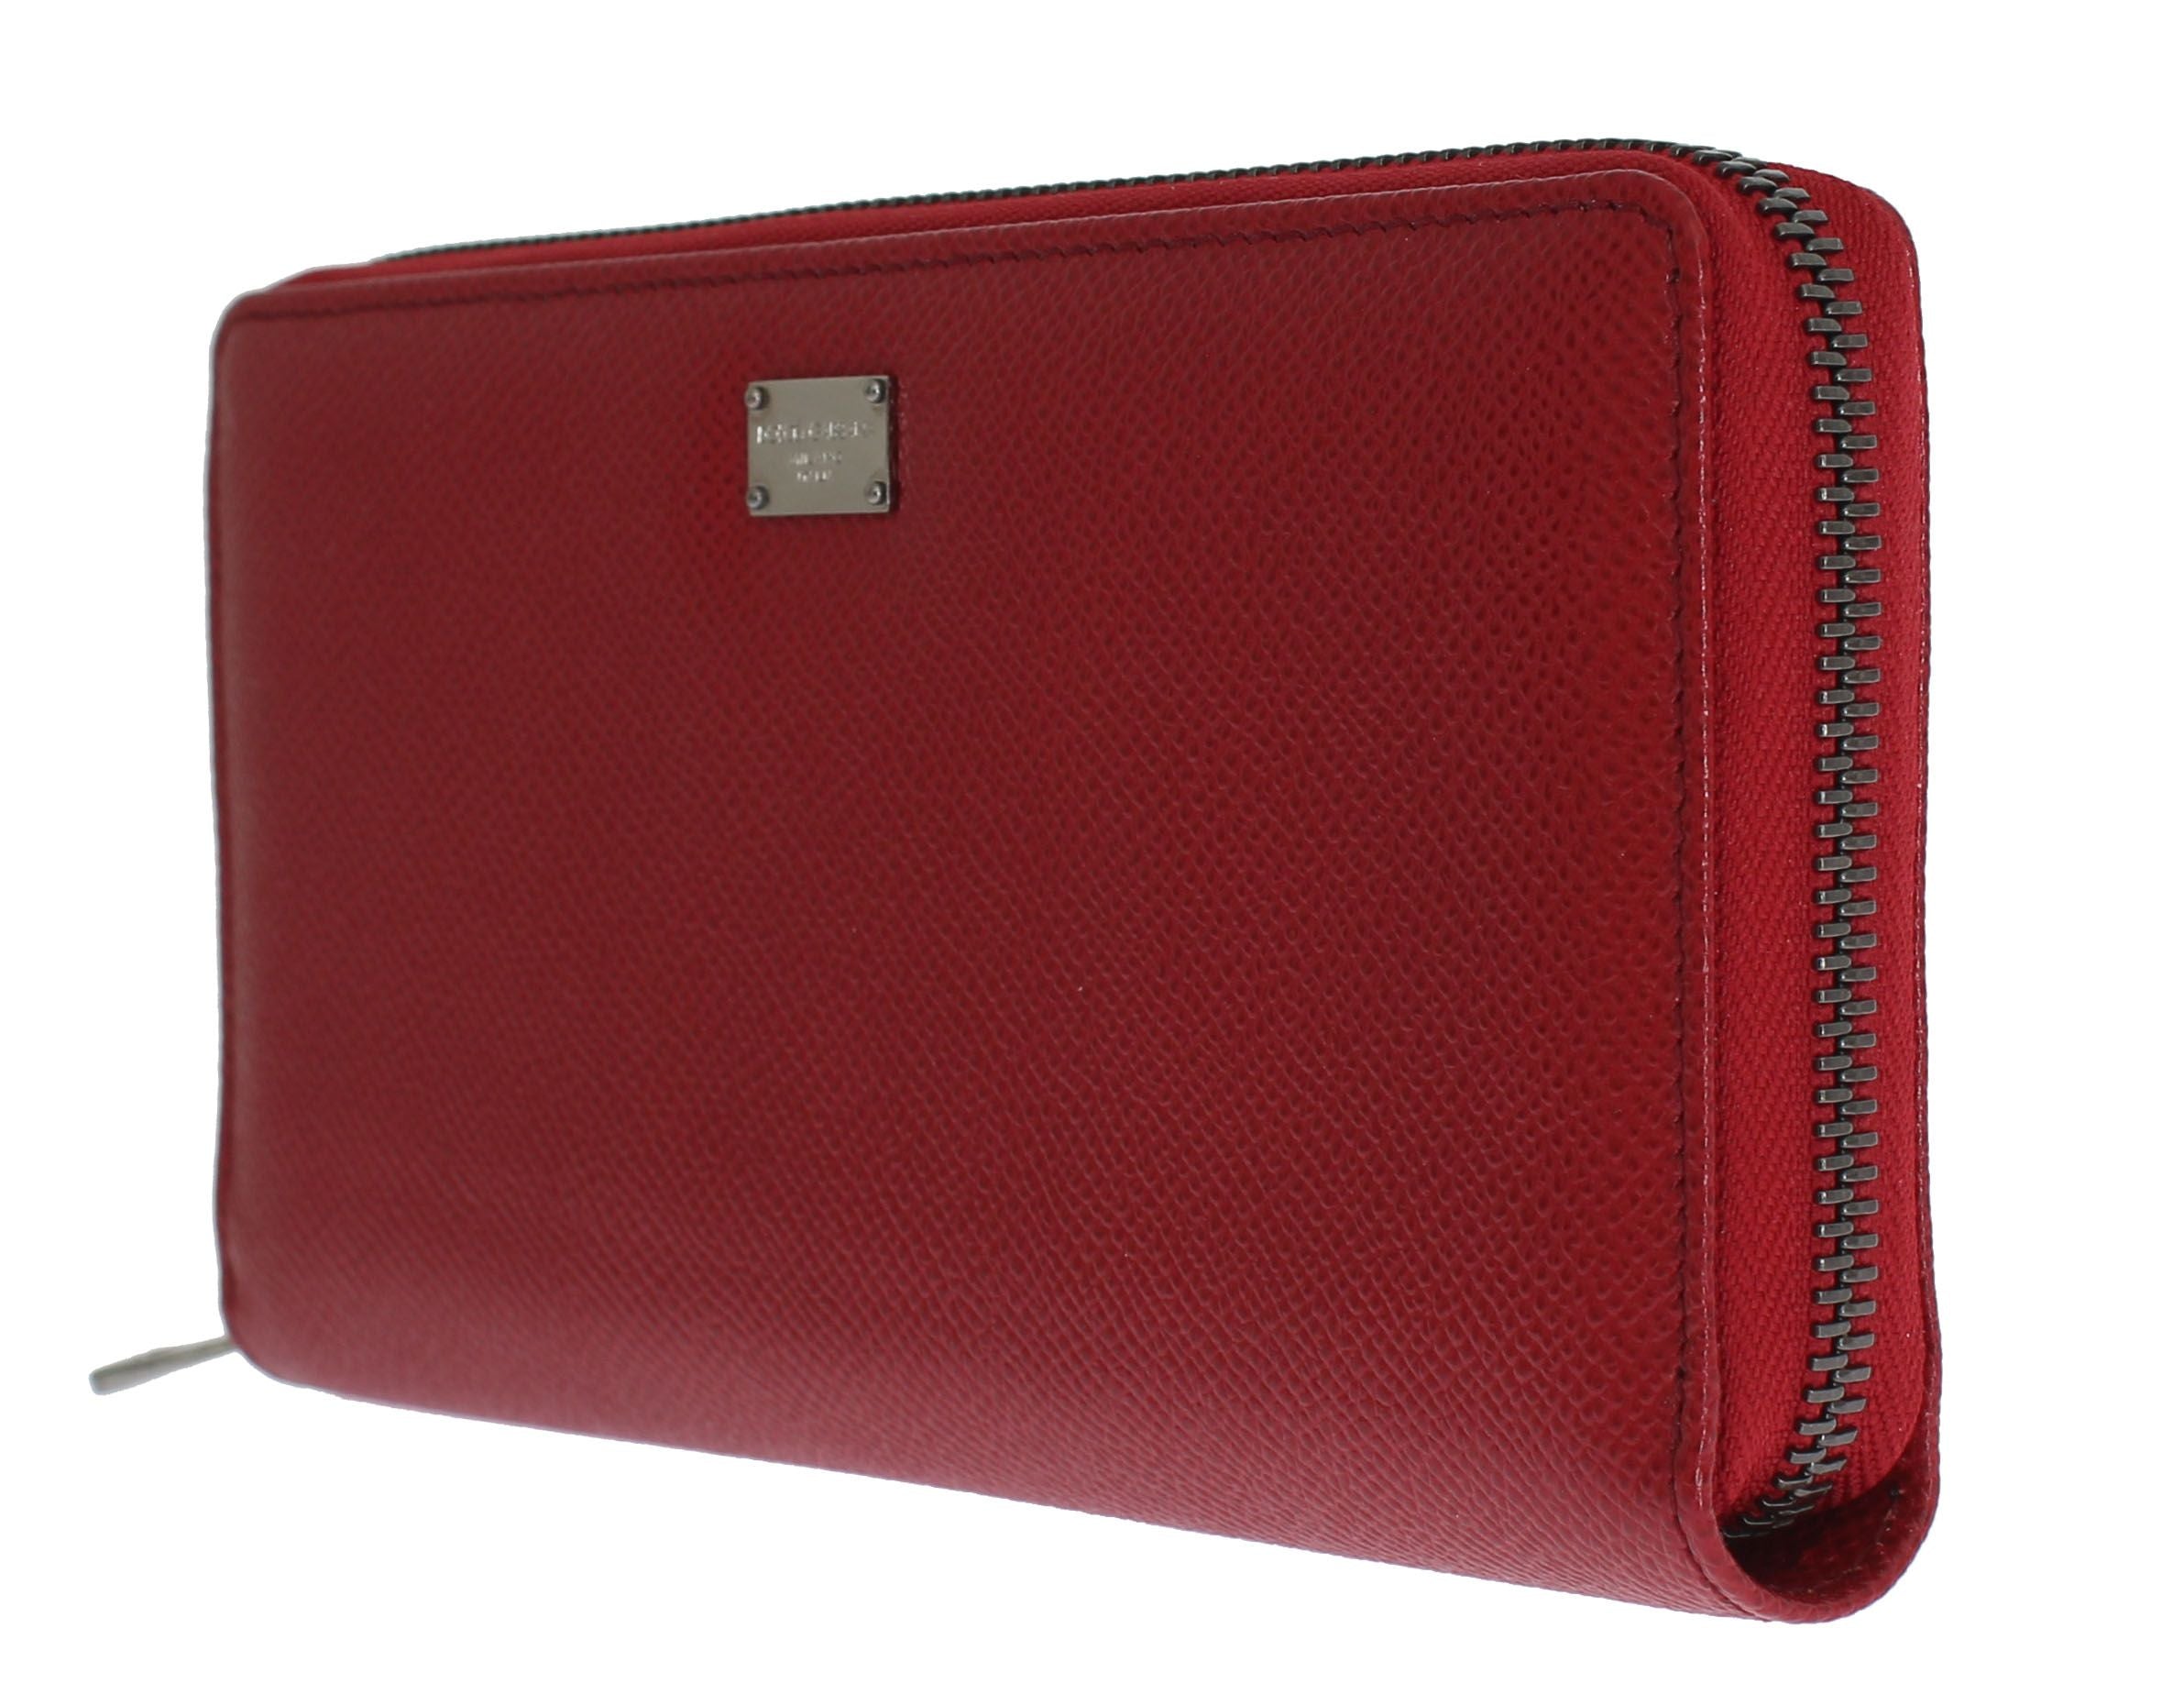 Dolce & Gabbana Elegant Red Leather Continental Wallet